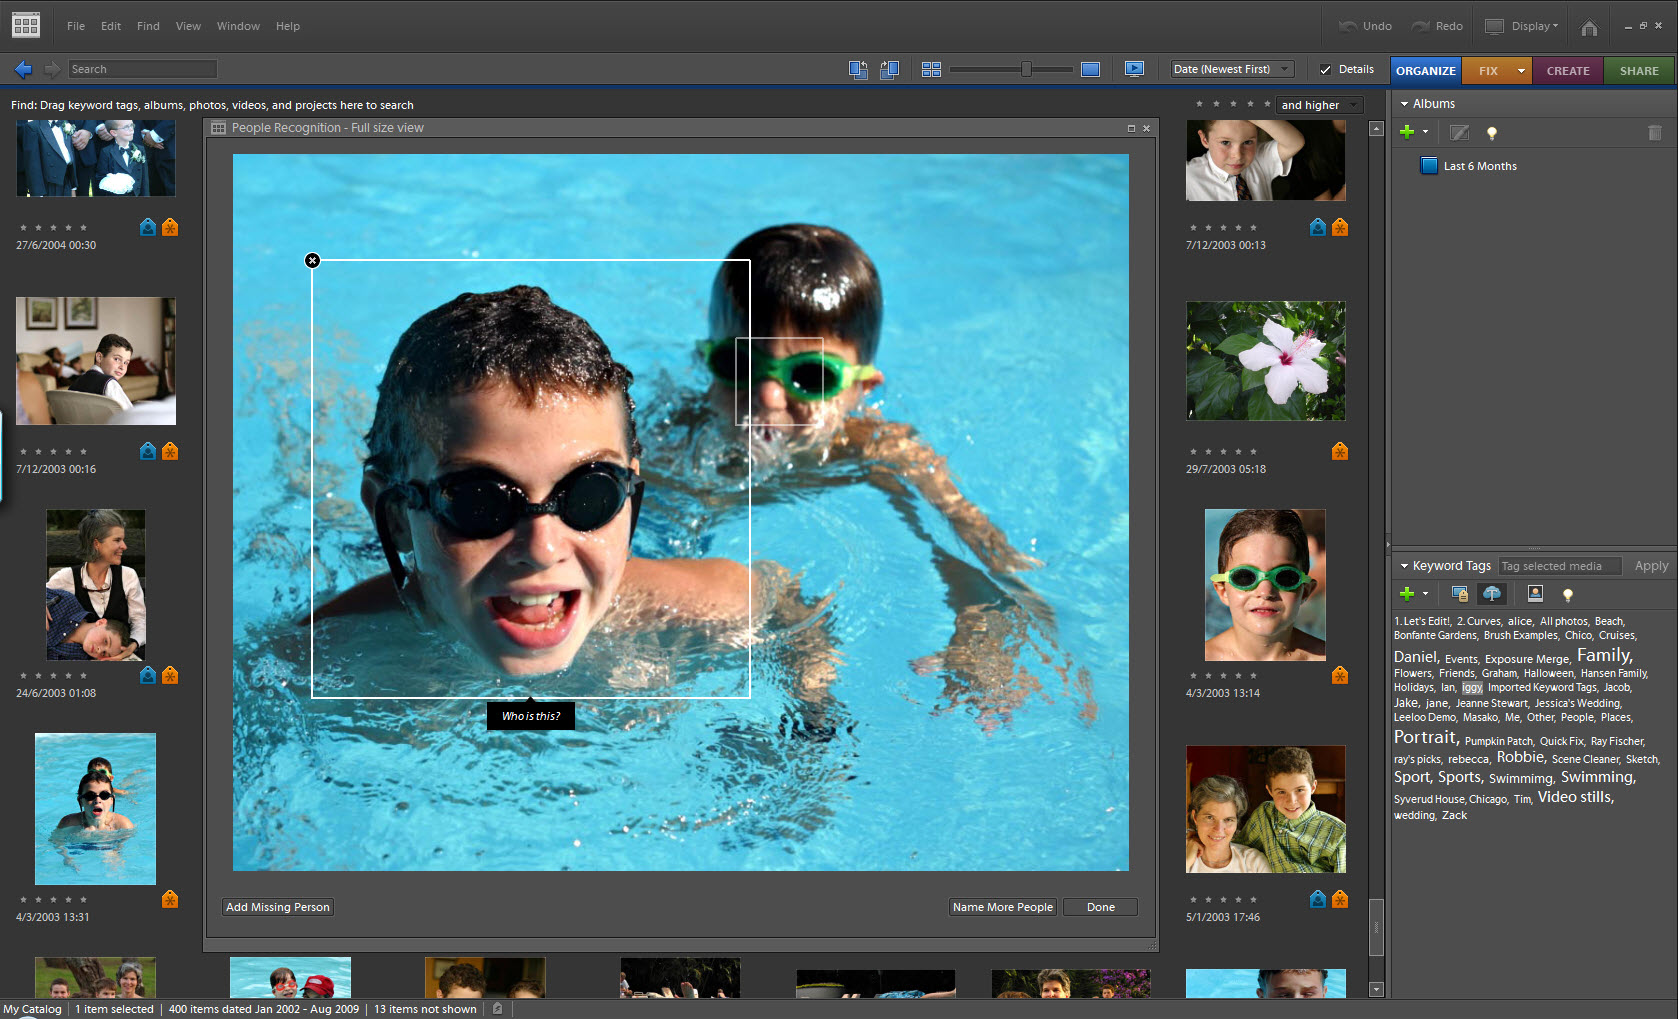 adobe photoshop elements 8 free download for windows 7